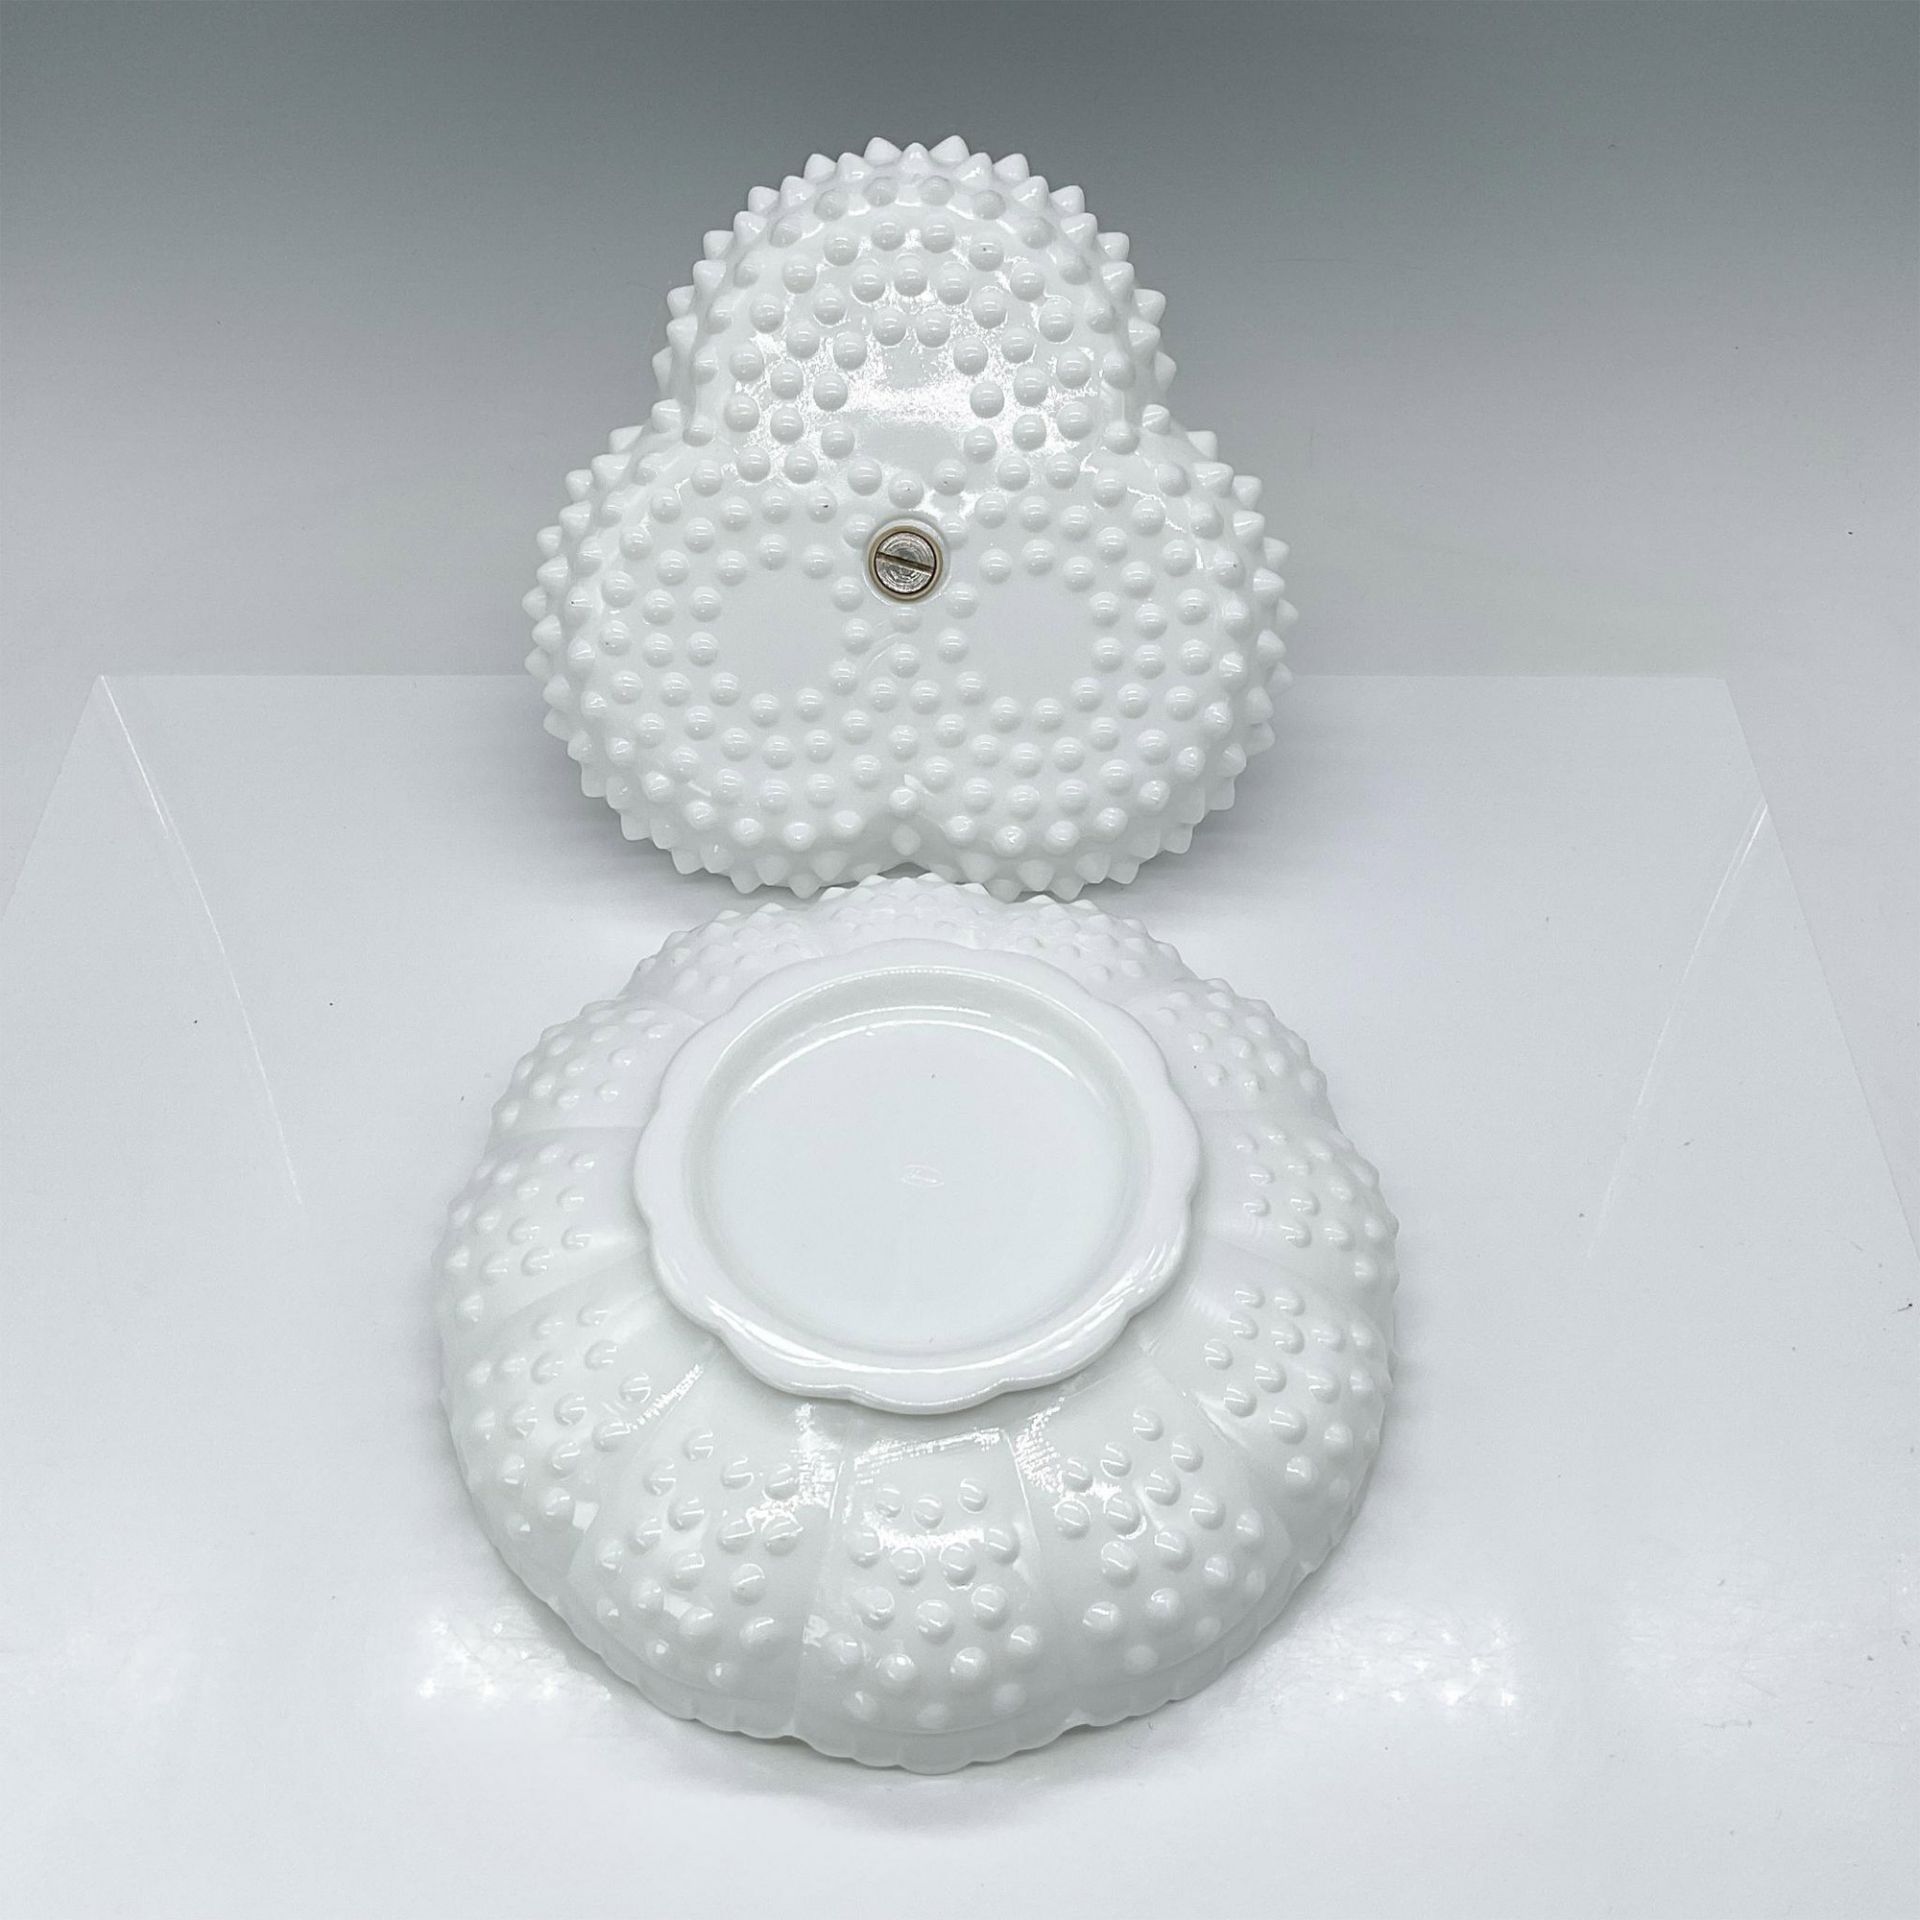 2pc Fenton Hobnail Milk Glass Serving Dishes - Image 4 of 4